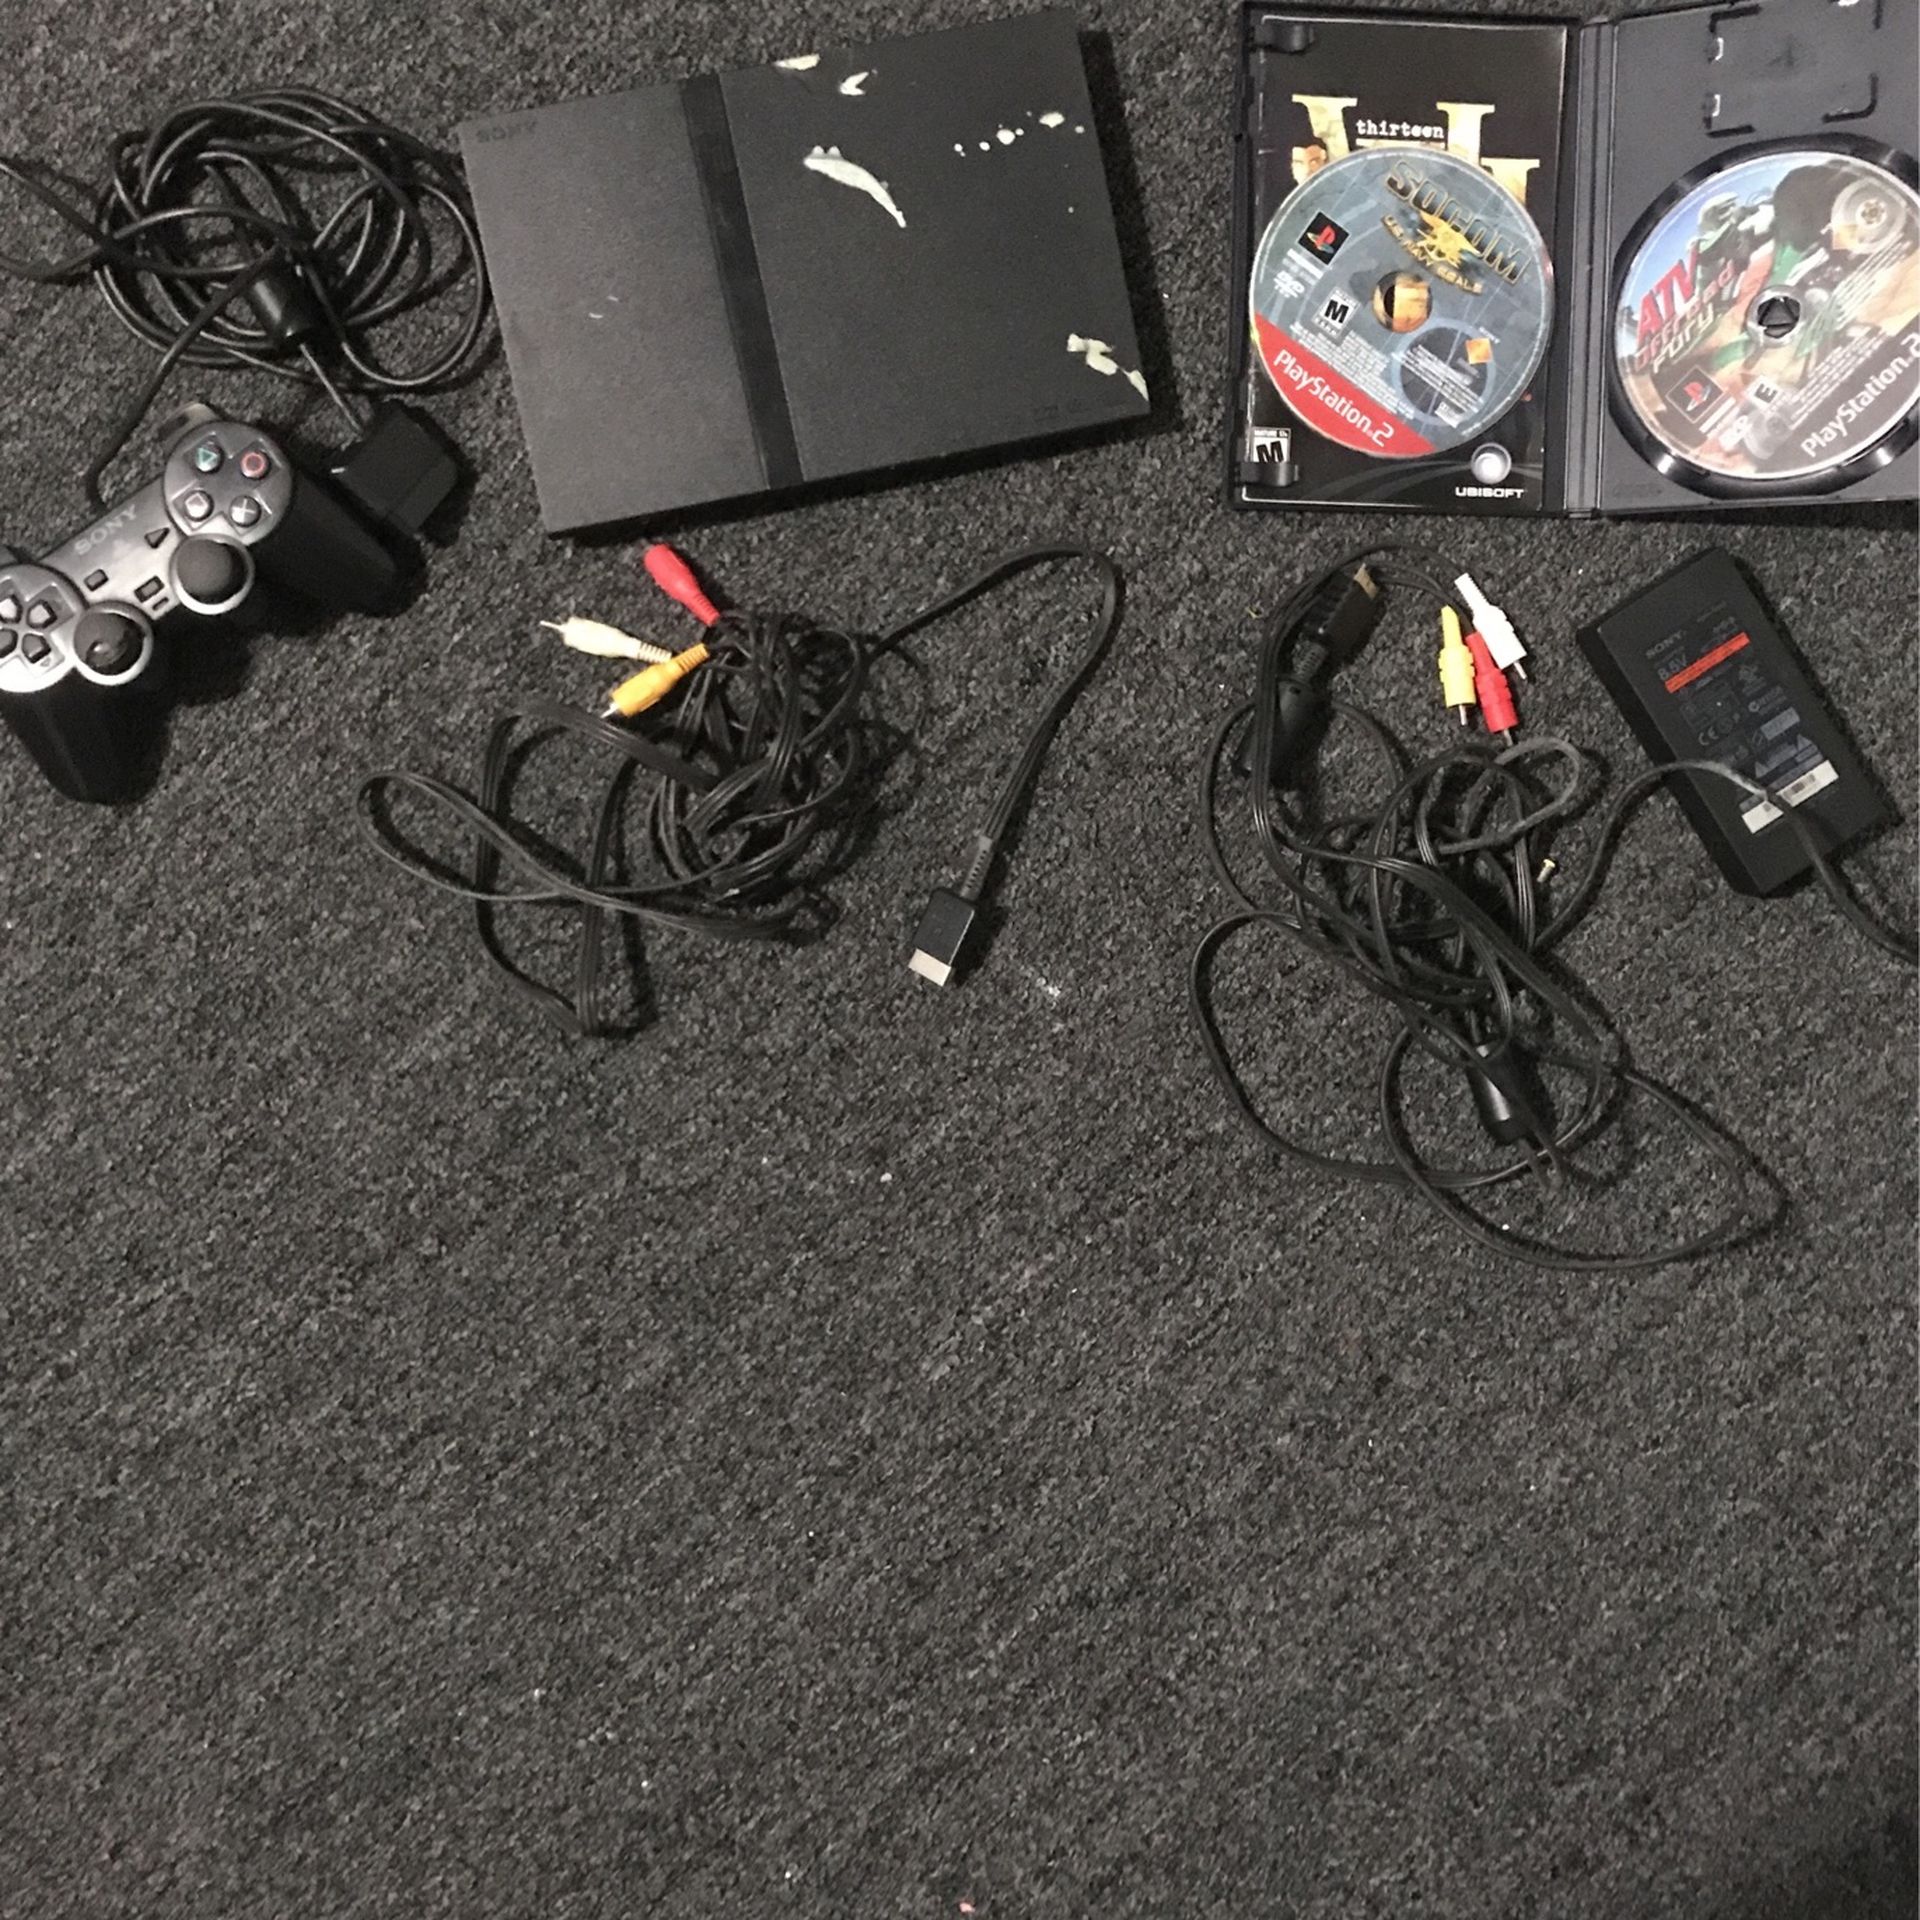 Used Play Station 2